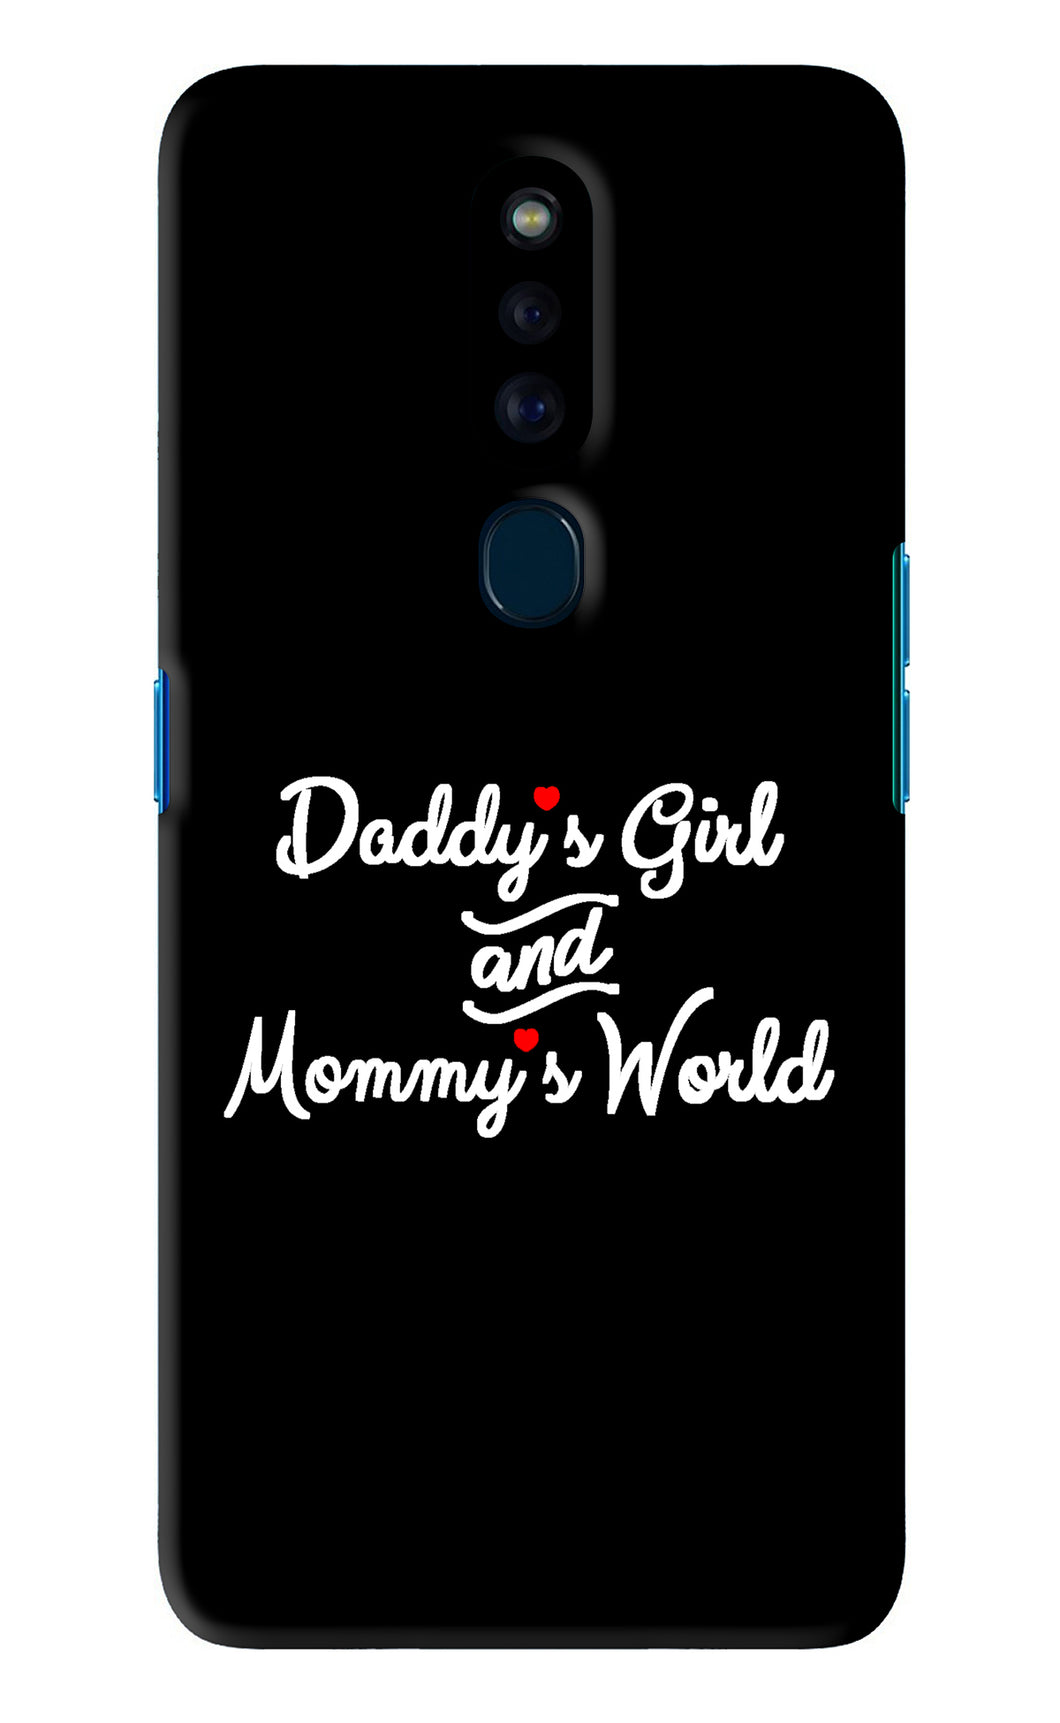 Daddy's Girl and Mommy's World Oppo F11 Pro Back Skin Wrap